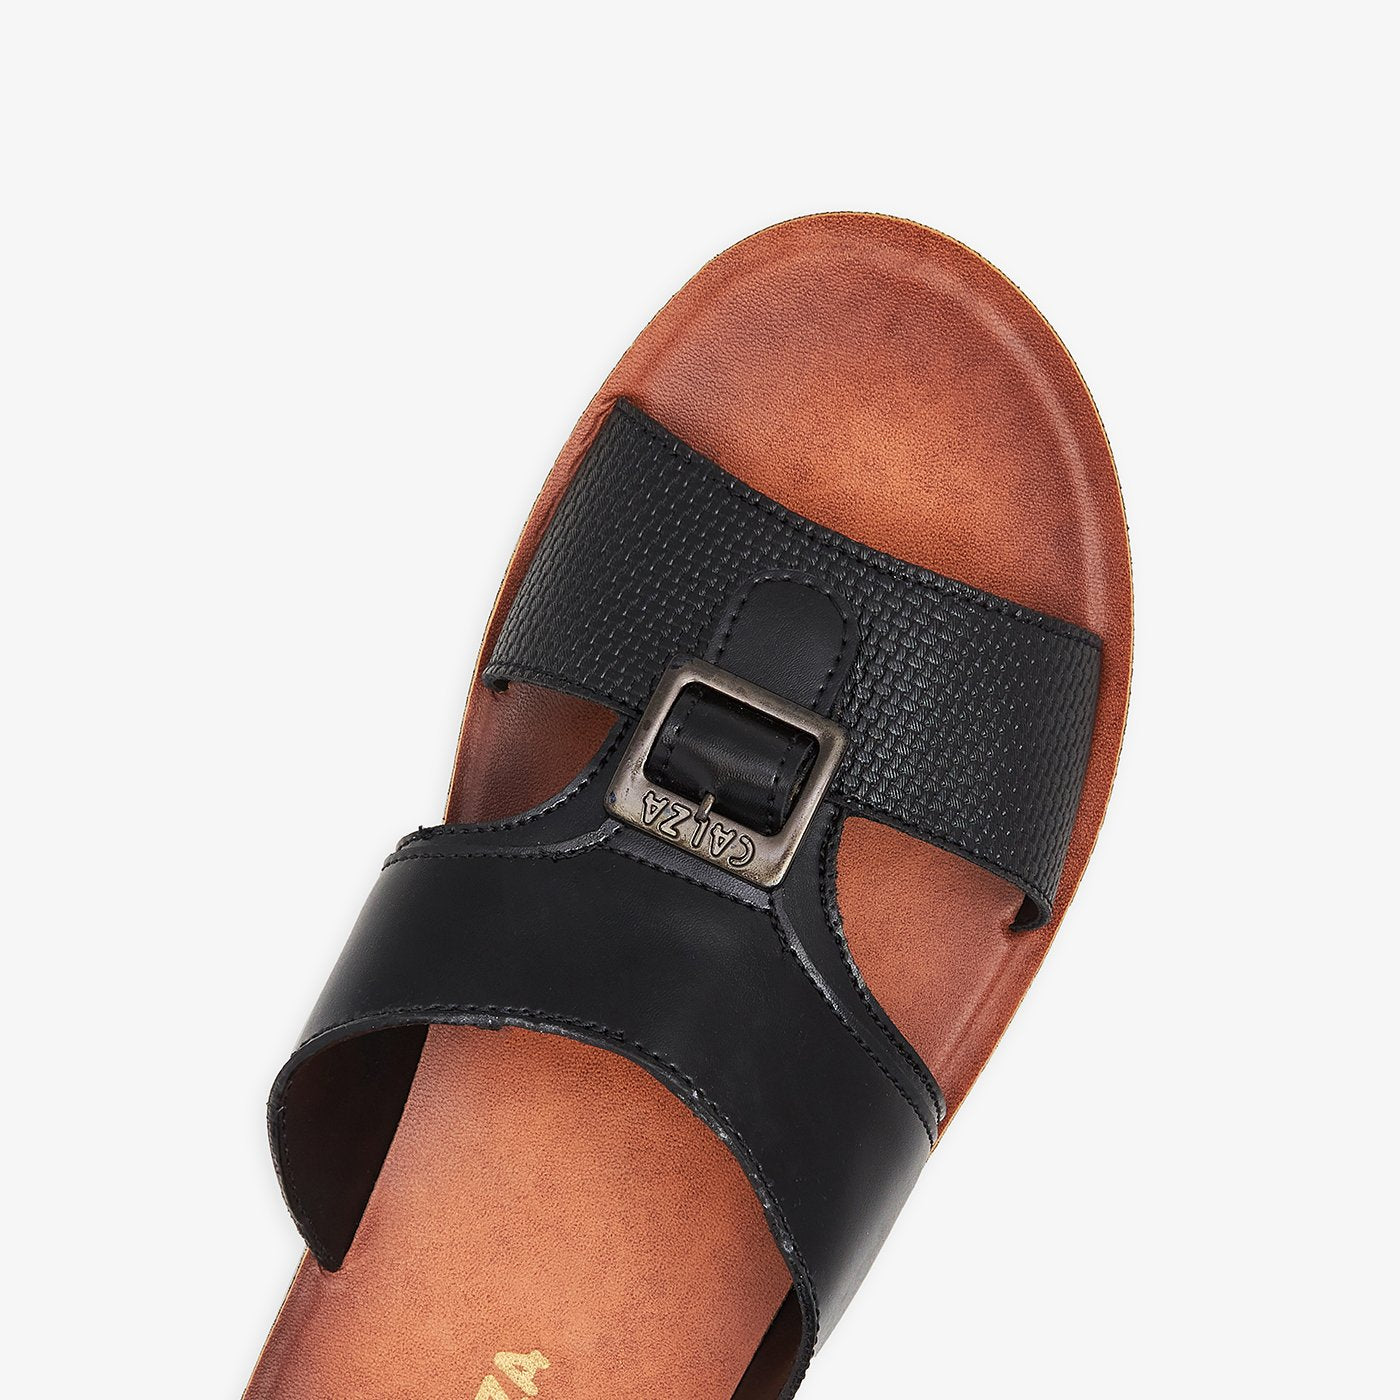 Easy on feet Embossed Chappals for Men